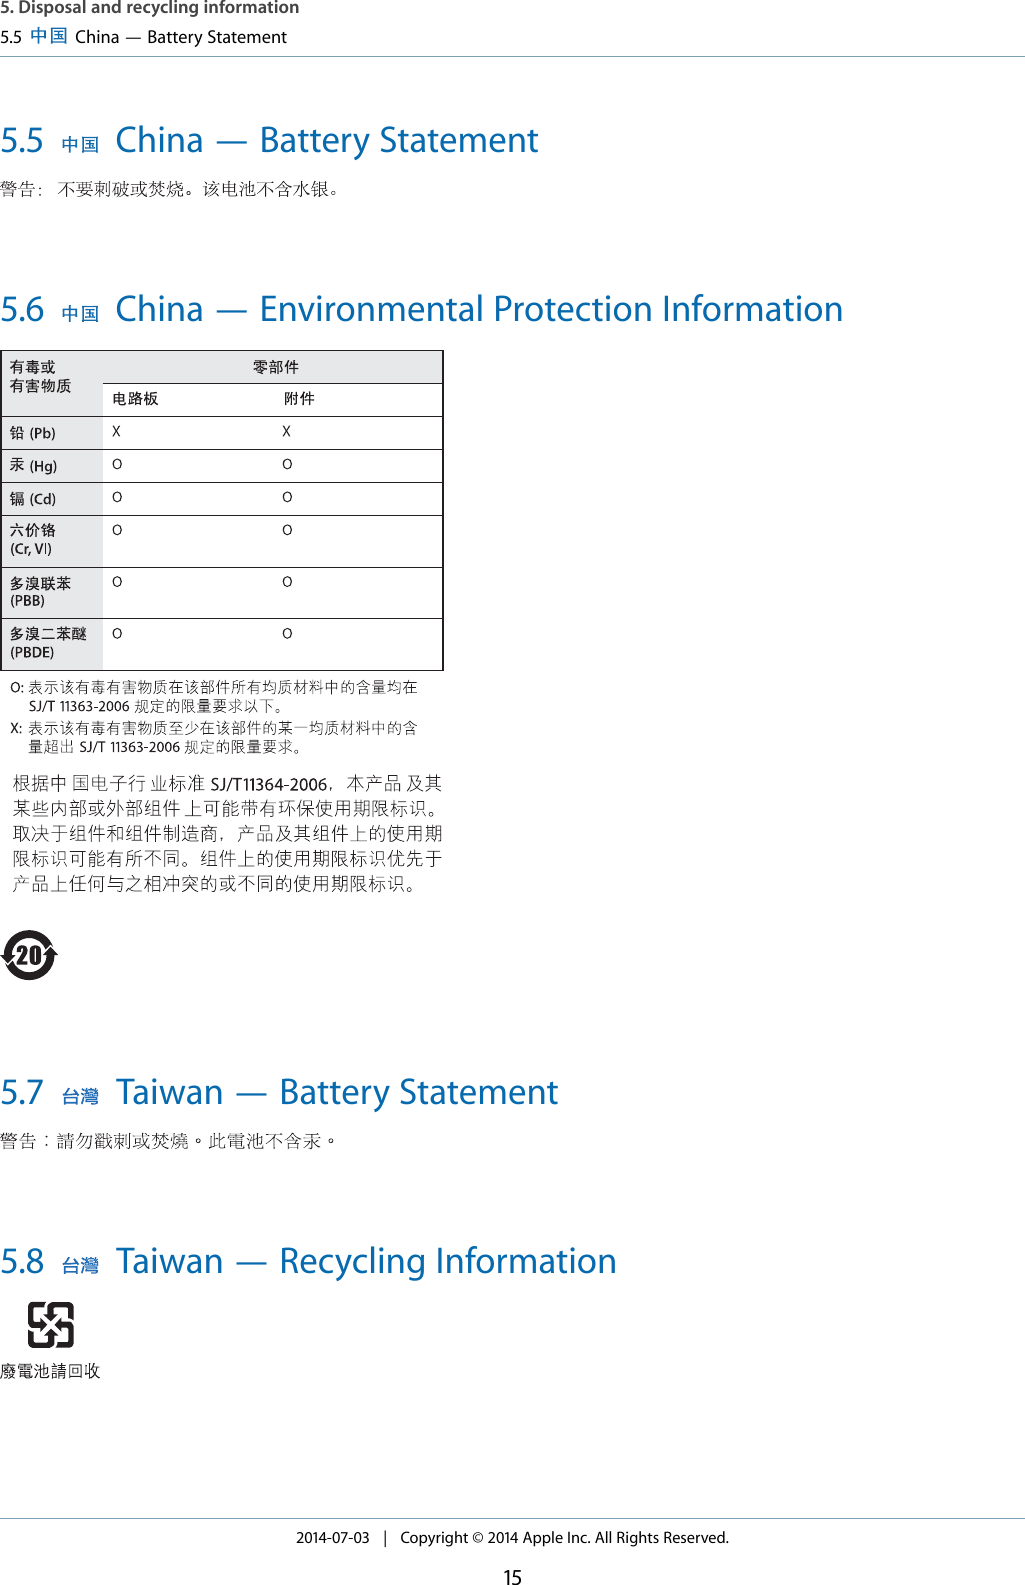 5.5 China — Battery Statement5.6 China — Environmental Protection Information5.7 Taiwan — Battery Statement5.8 Taiwan — Recycling Information5. Disposal and recycling information5.5 China — Battery Statement2014-07-03   |   Copyright © 2014 Apple Inc. All Rights Reserved.15